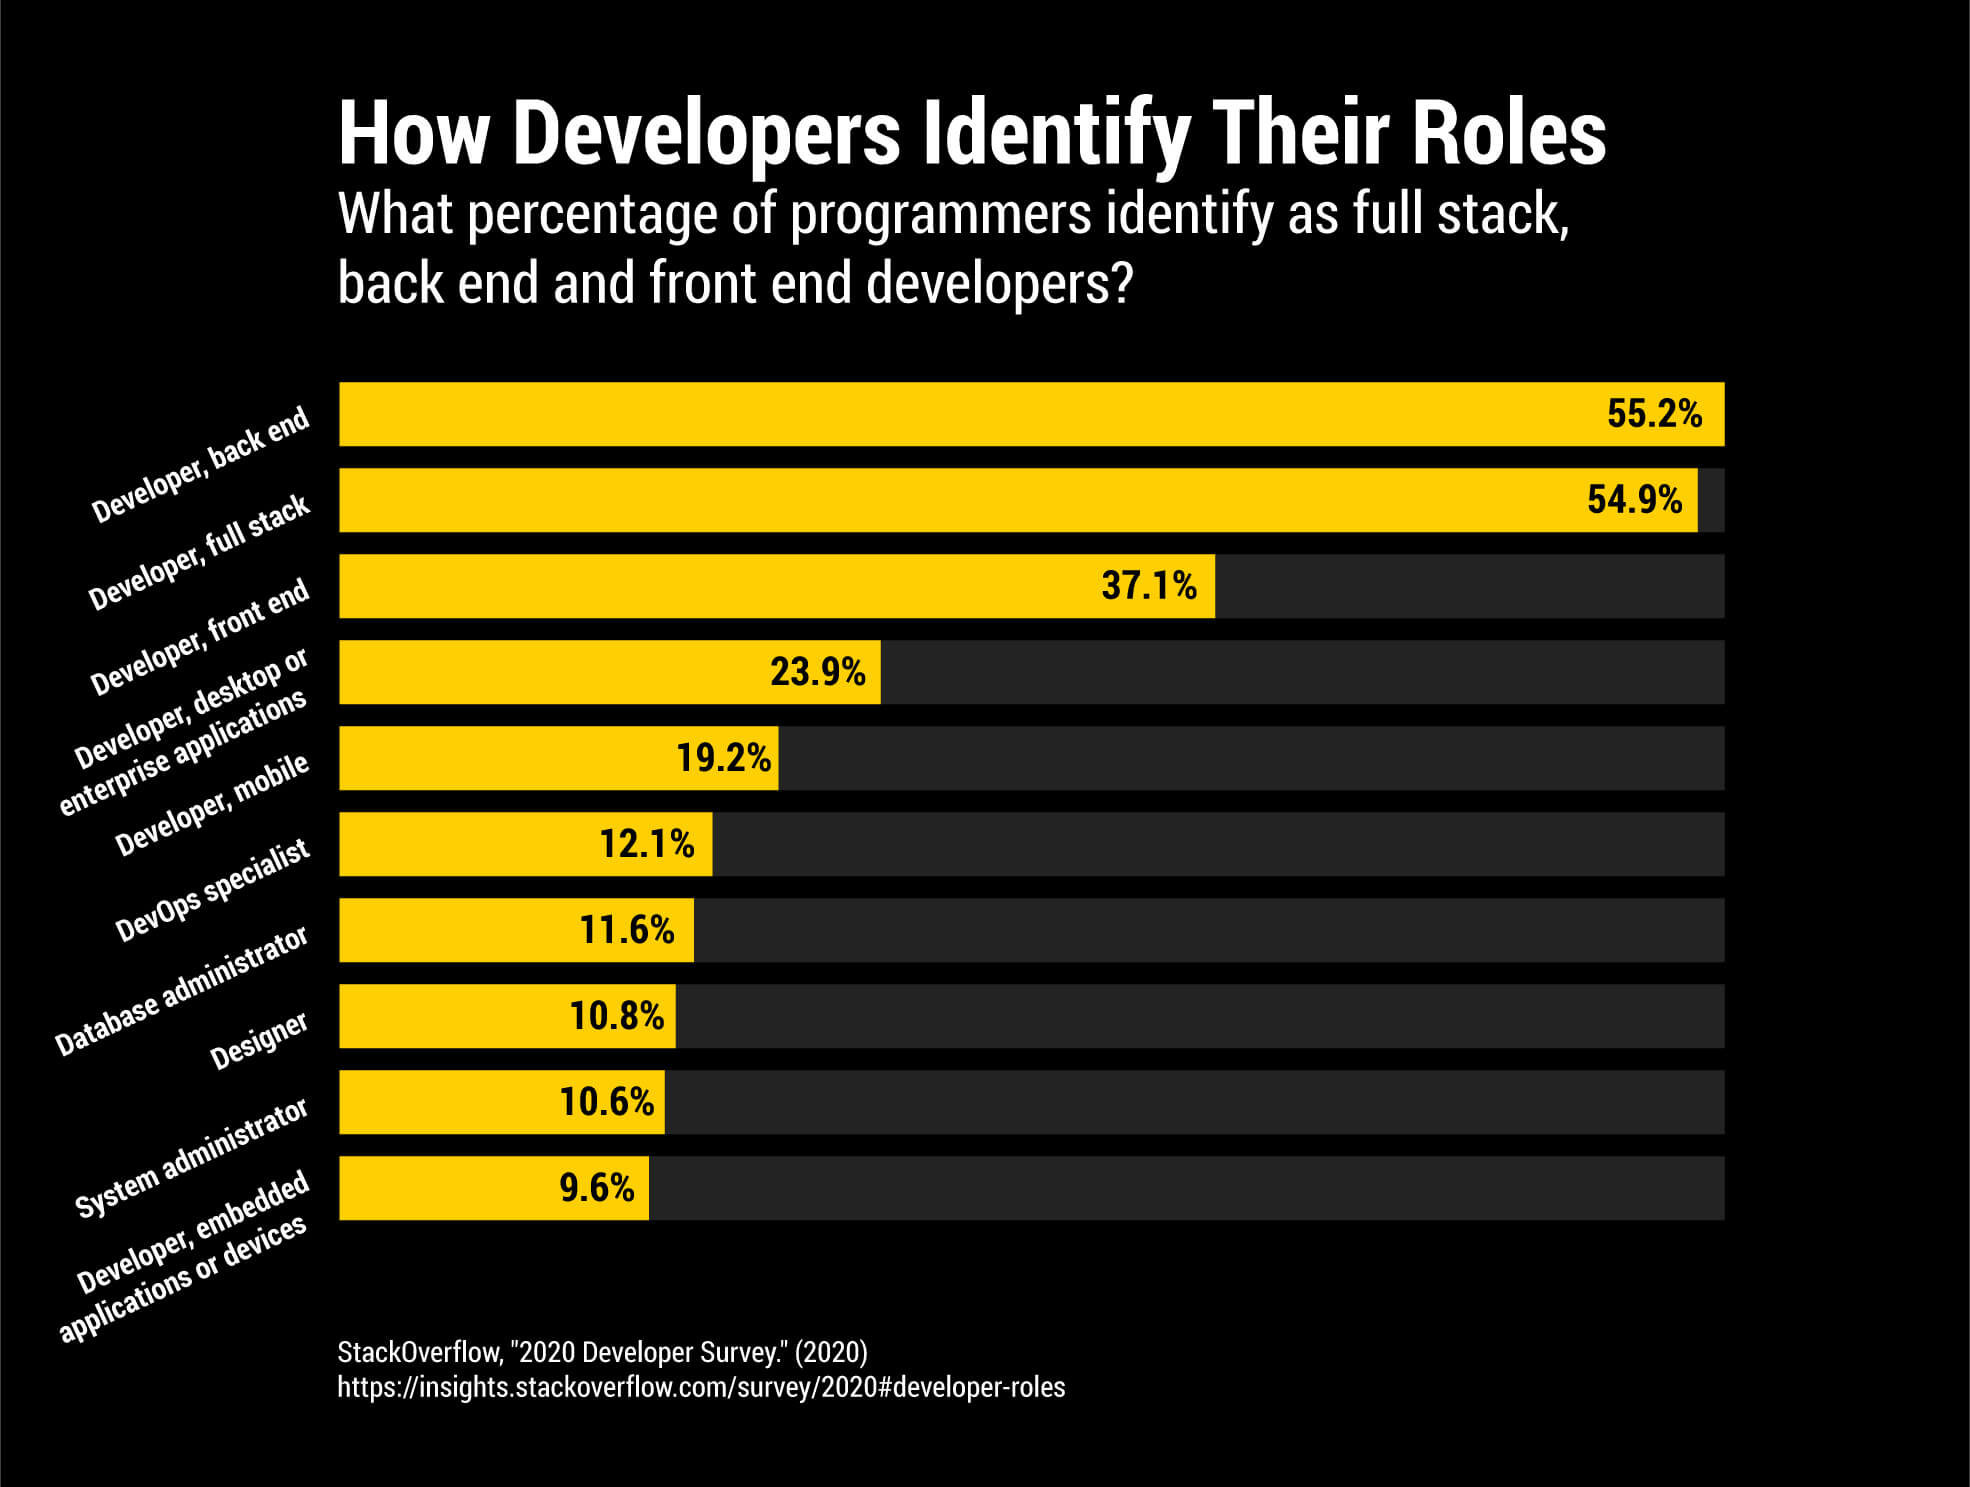 A graph showing what percentage of developers identify as full stack, front end, and back end